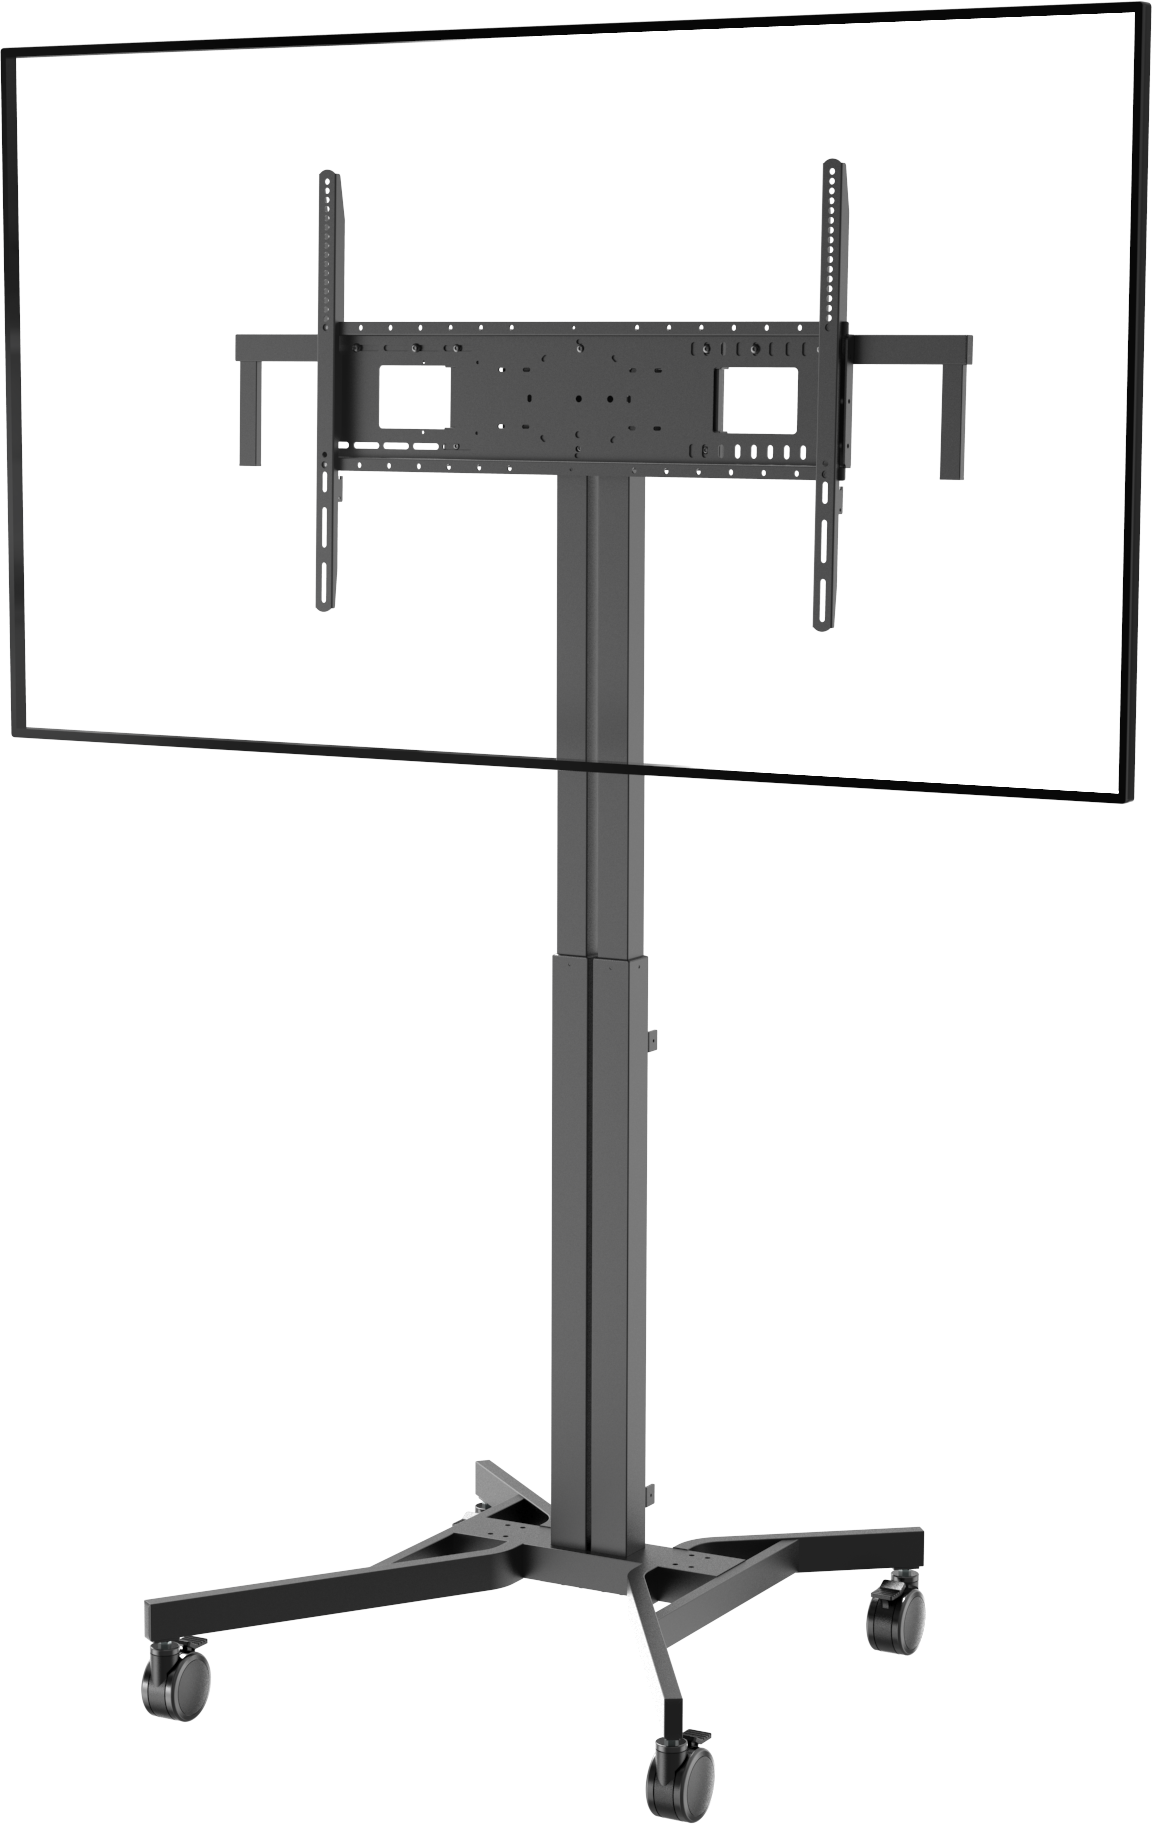 VFM-F30_W_front_angle_right-1.png